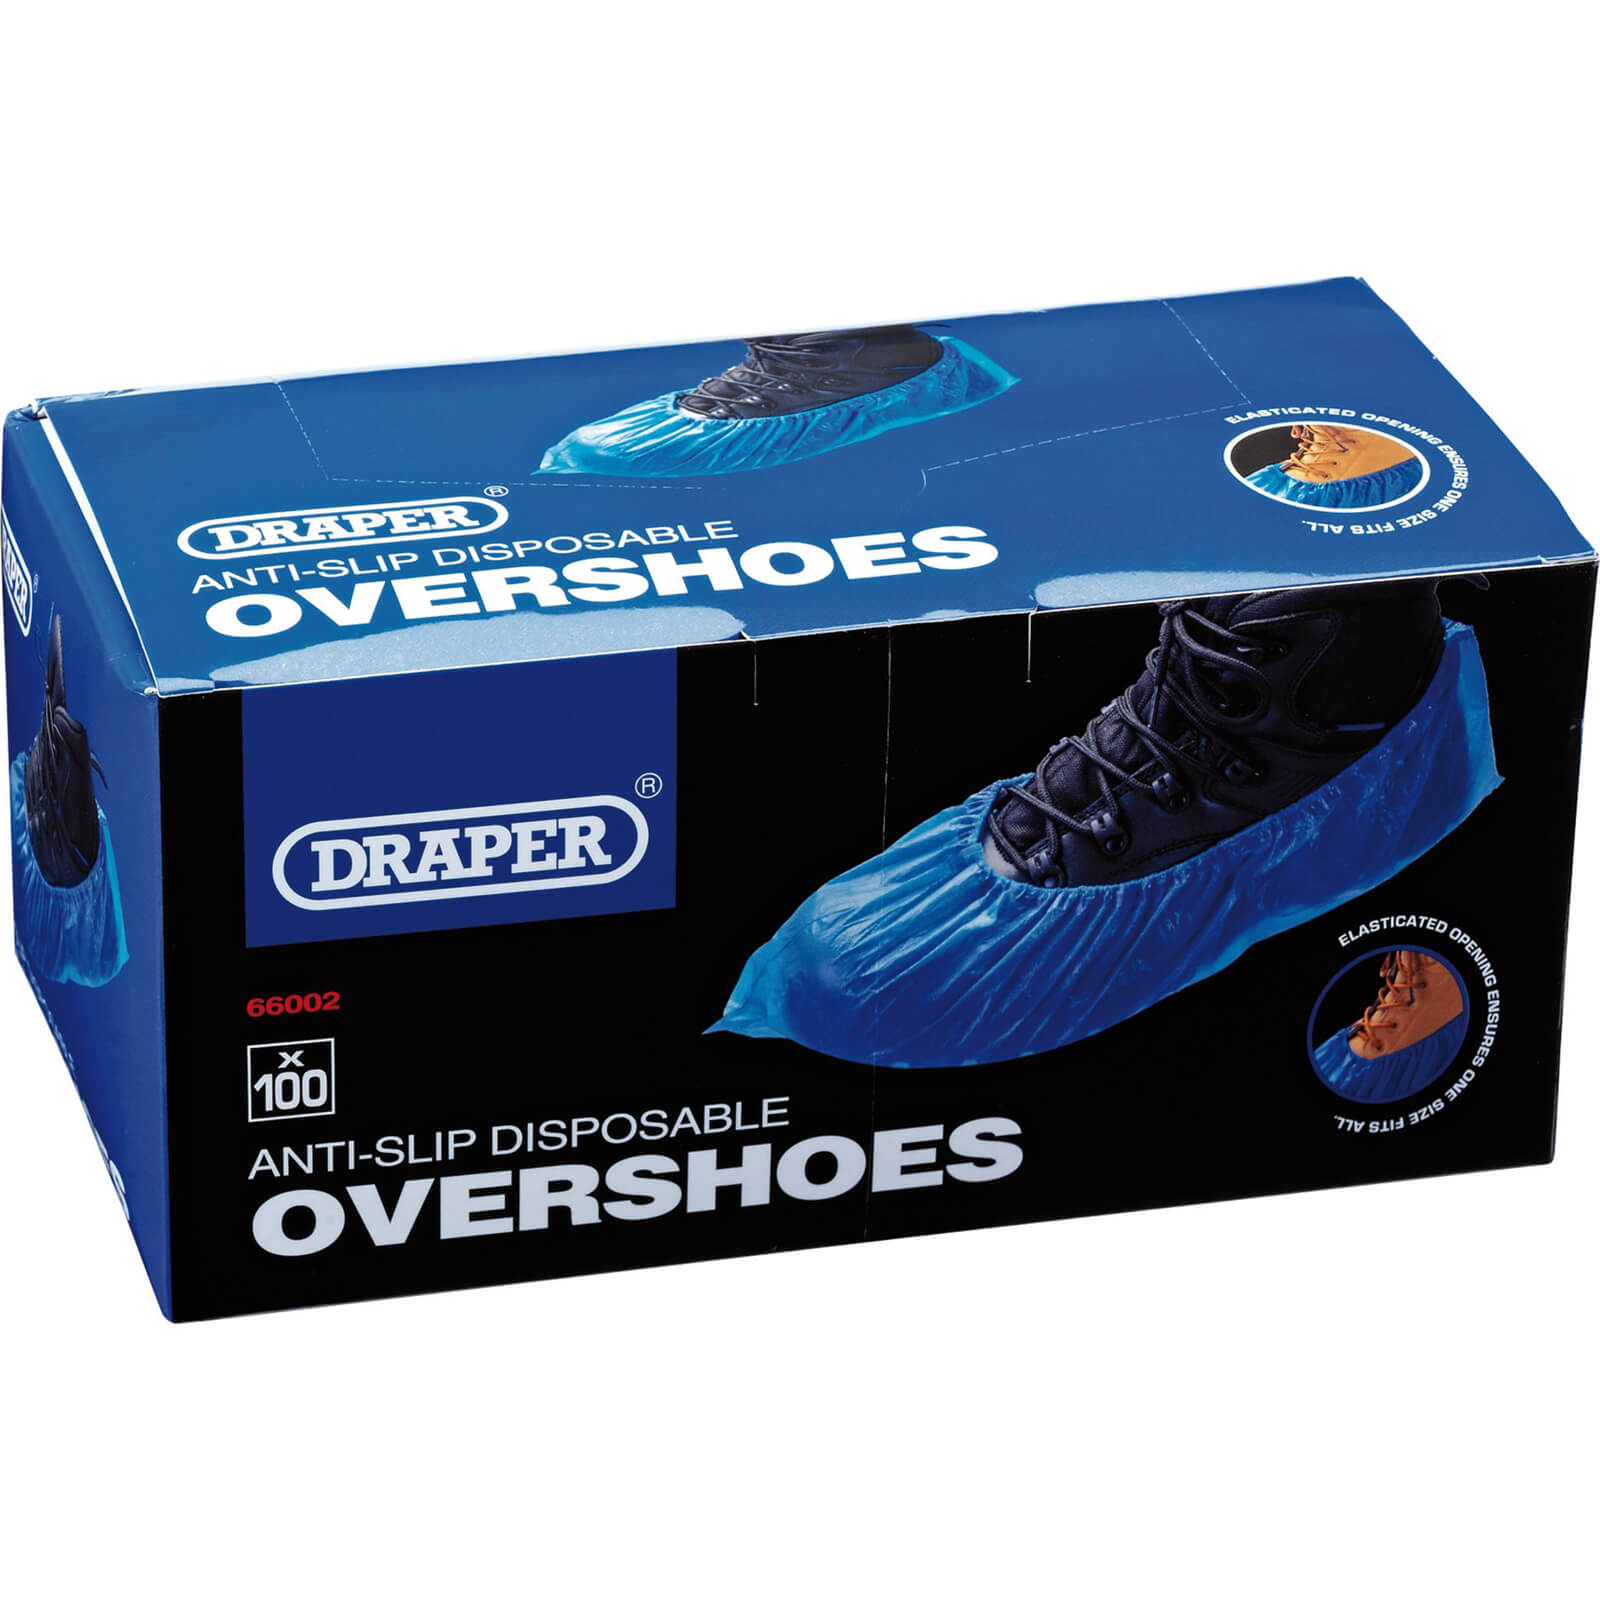 Image of Draper Disposable Overshoe Covers Pack of 100